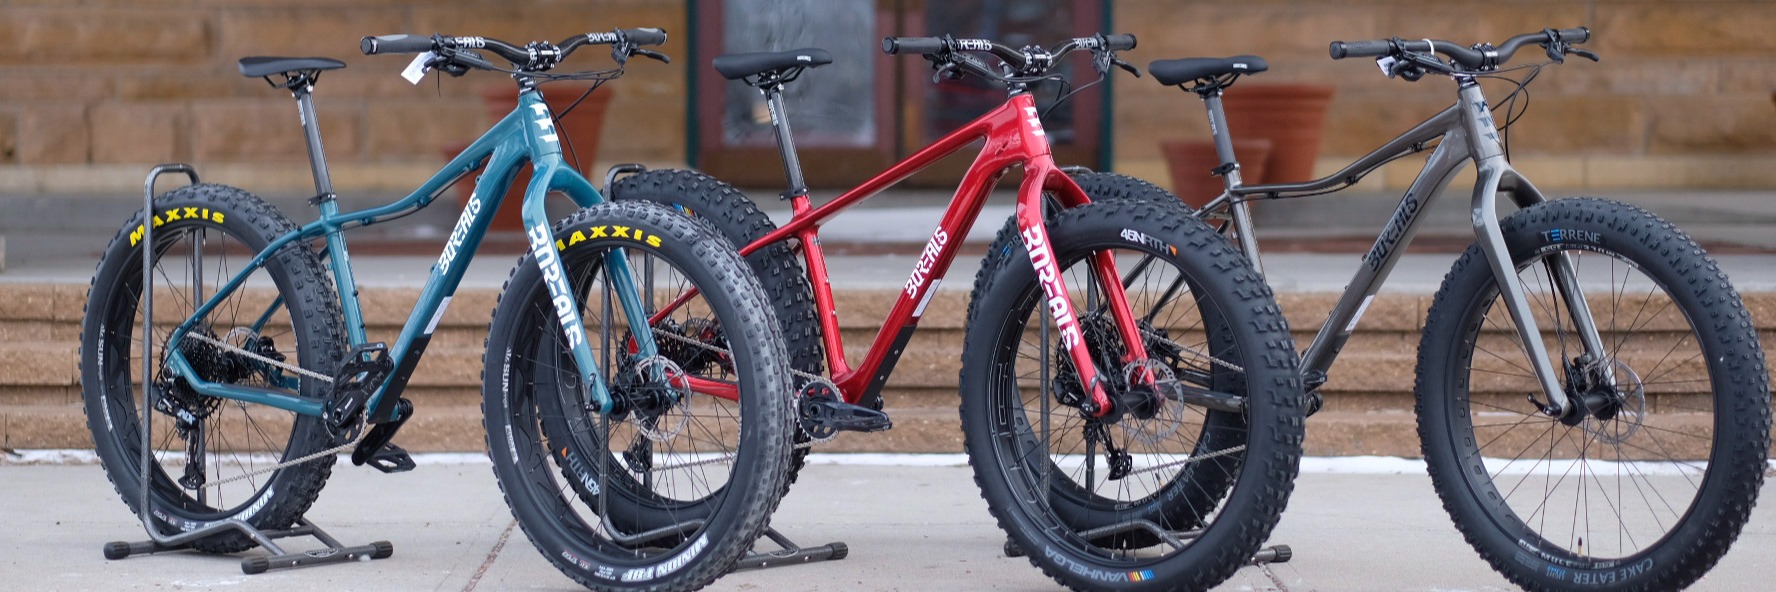 Row of three Borealis Brand Fatbikes in blue, red, and charcoal colors.